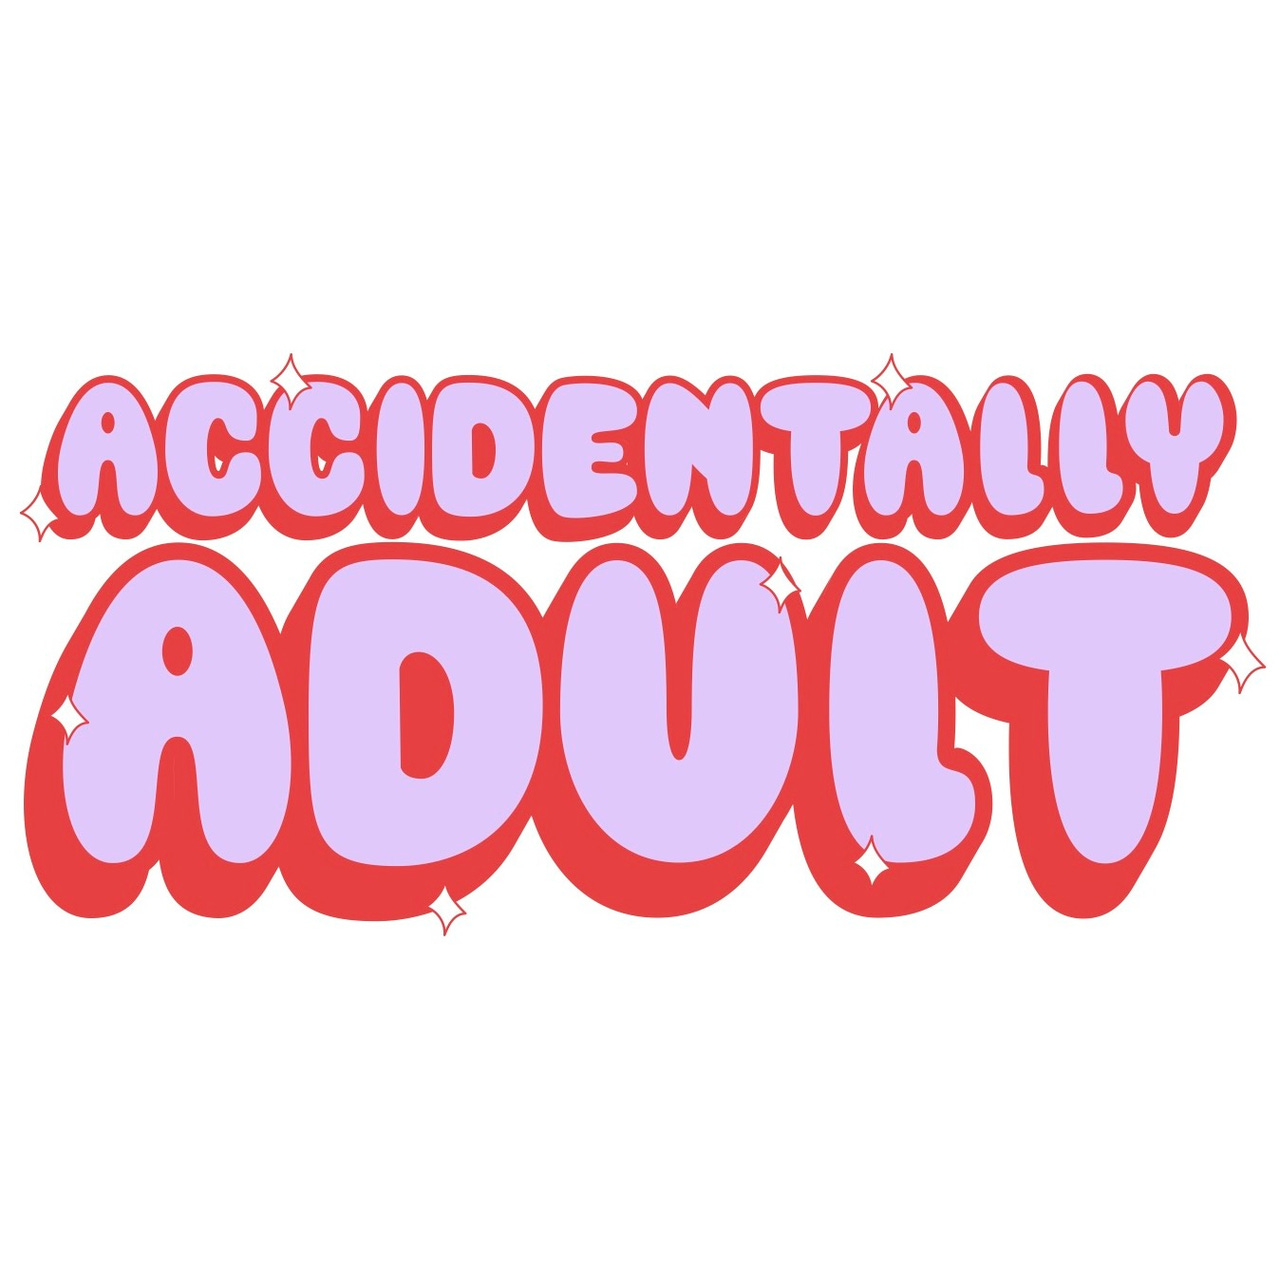 Accidentally Adult